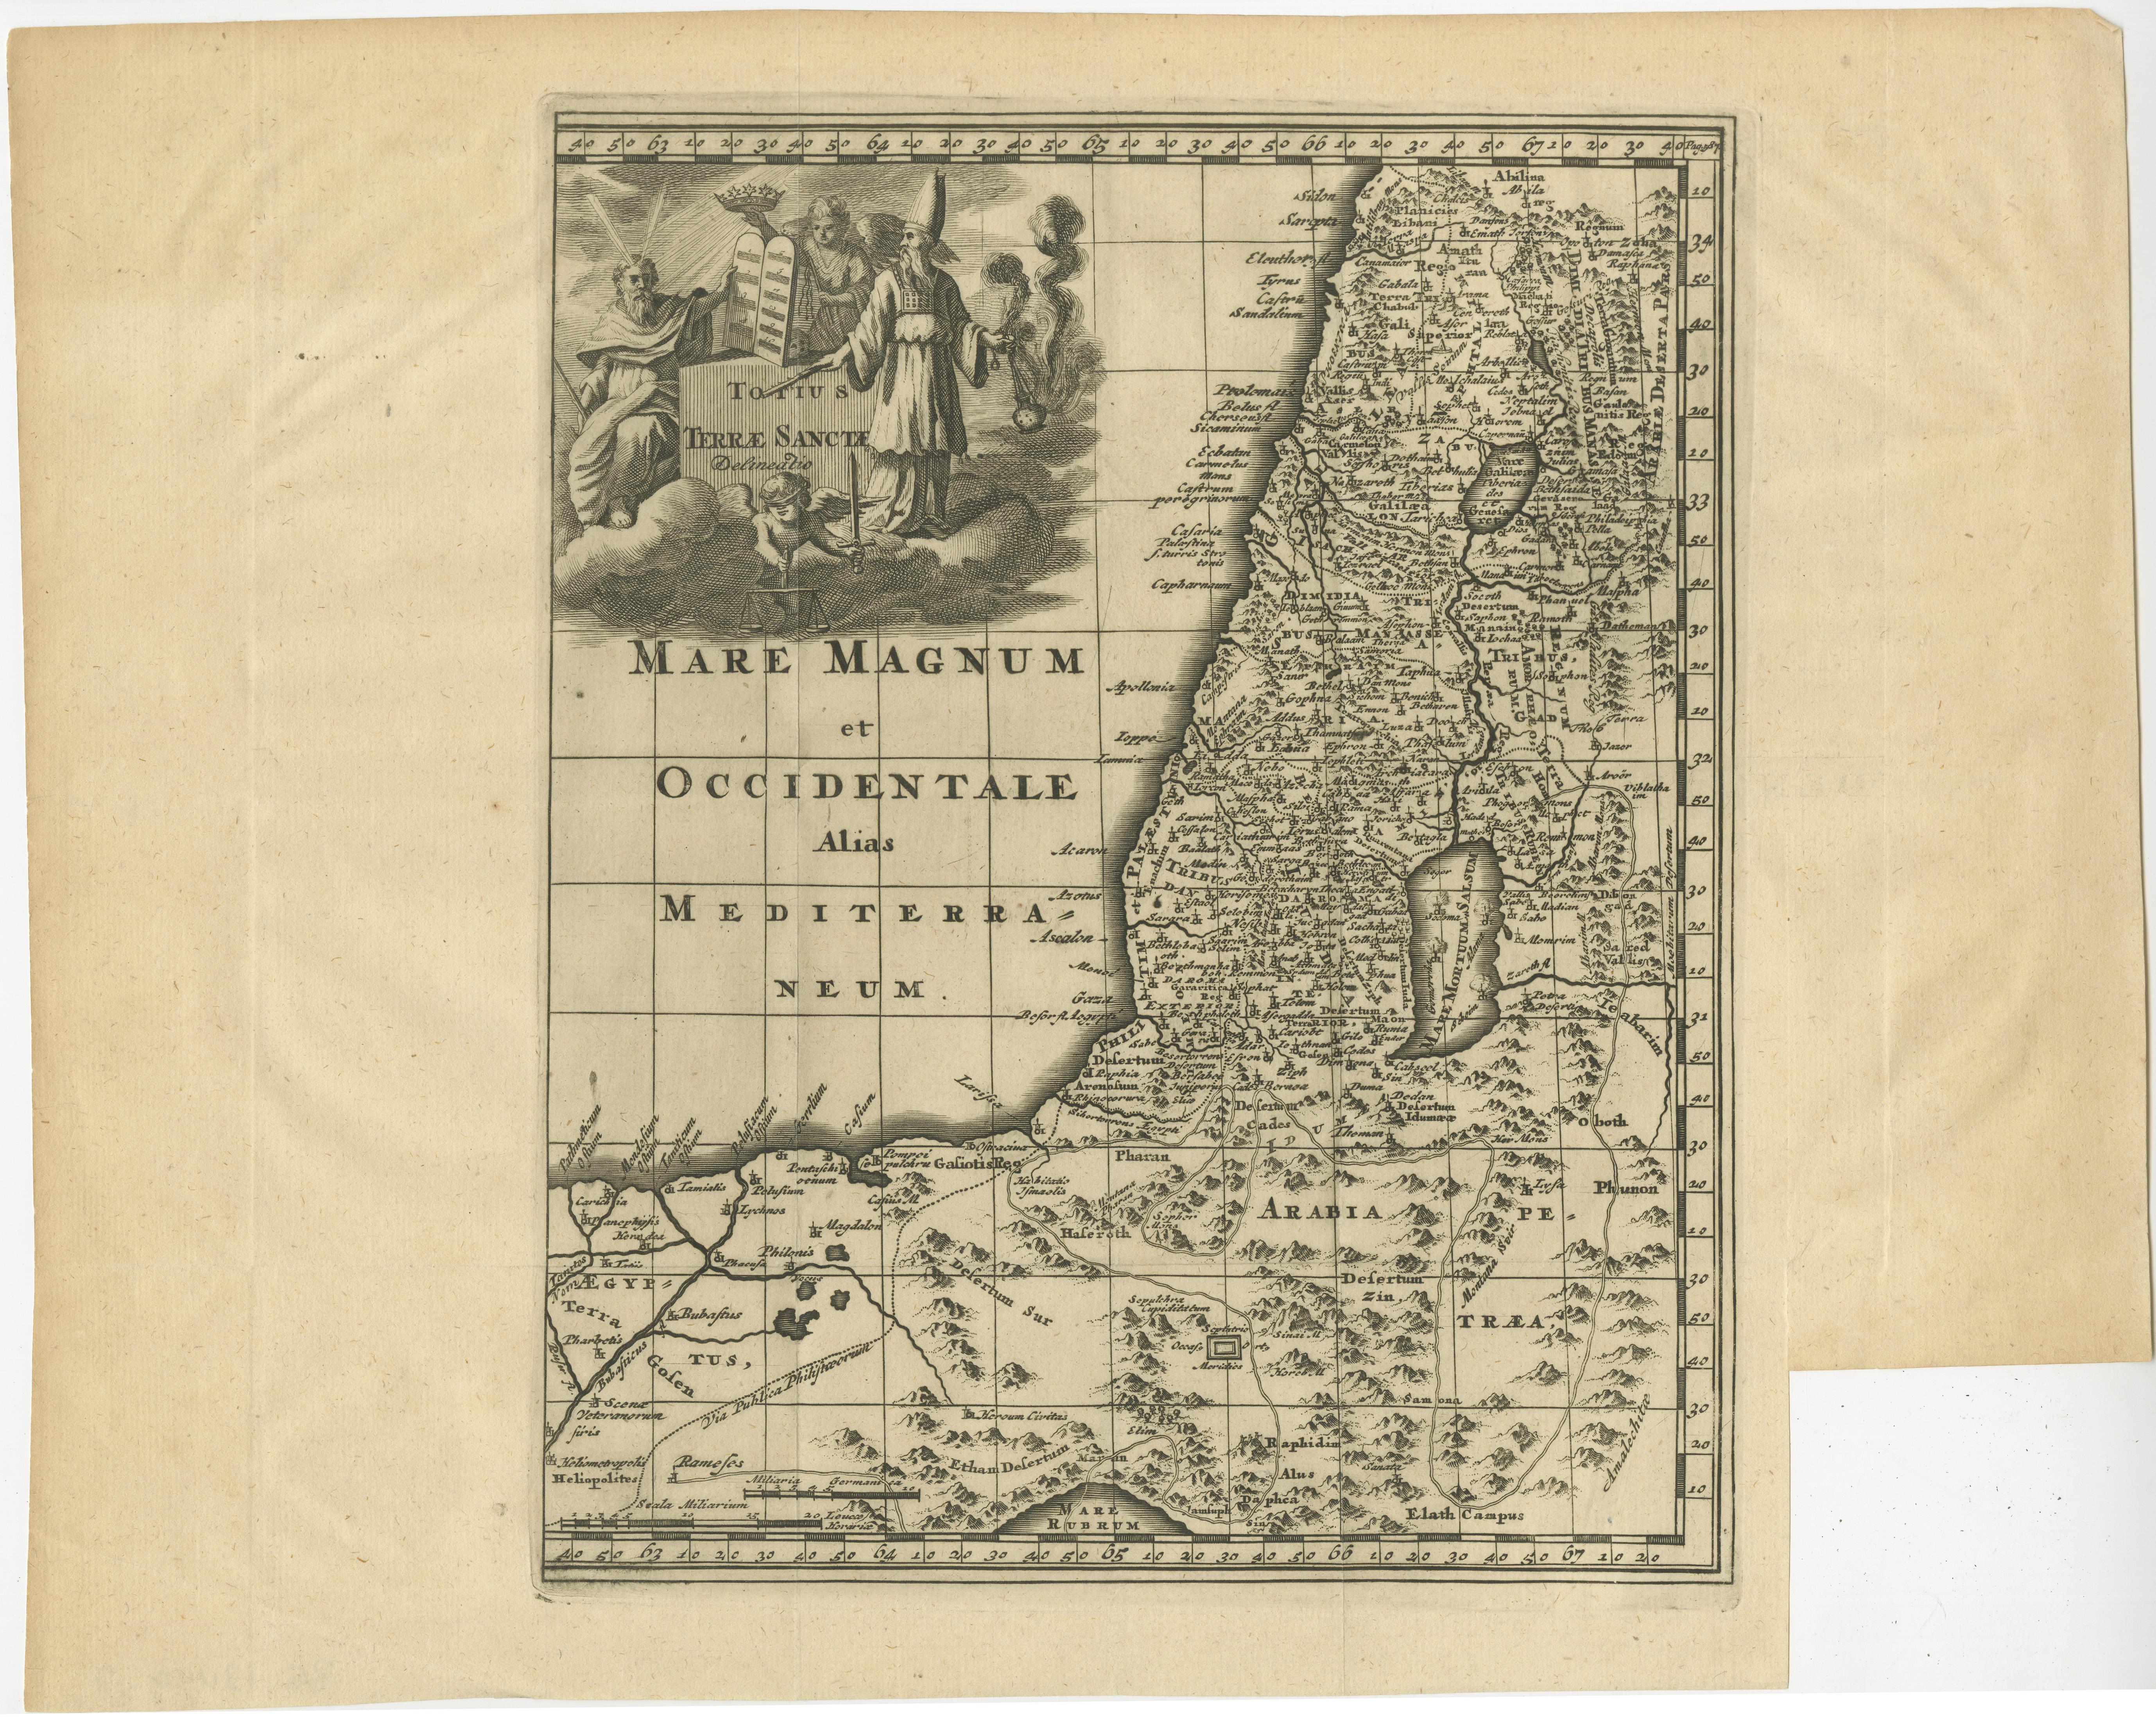 Antique map titled 'Totius Terrae Sanctae'. Original old map of the Holy Land, with a large decorative cartouche. The term 